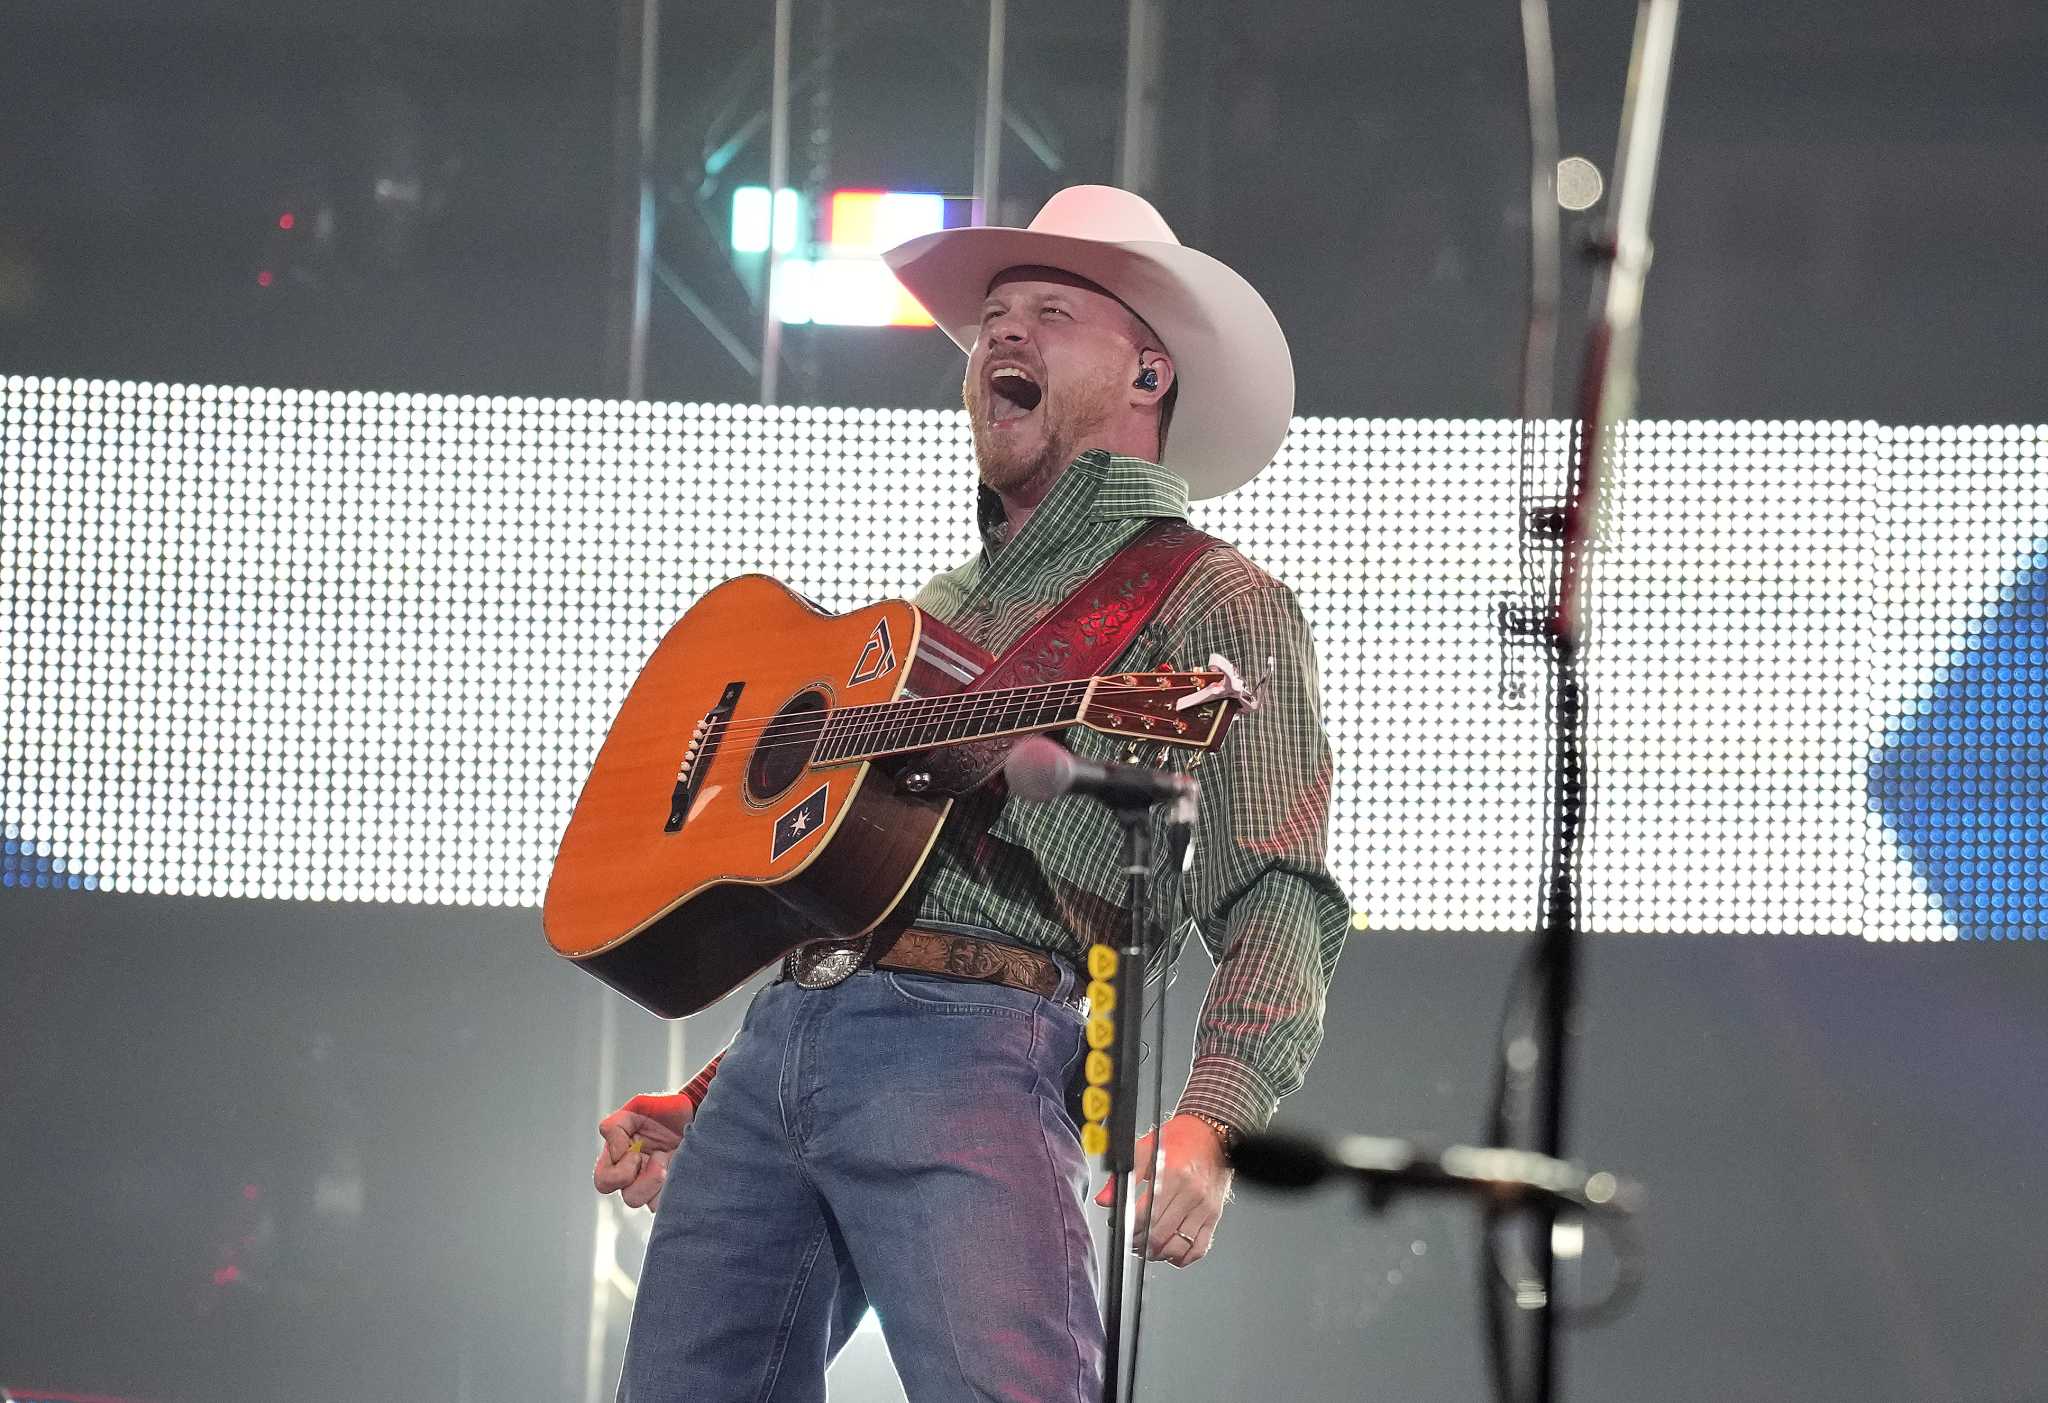 Cody Johnson arrives at Houston Rodeo with No. 1 hit 'Til You Can't'